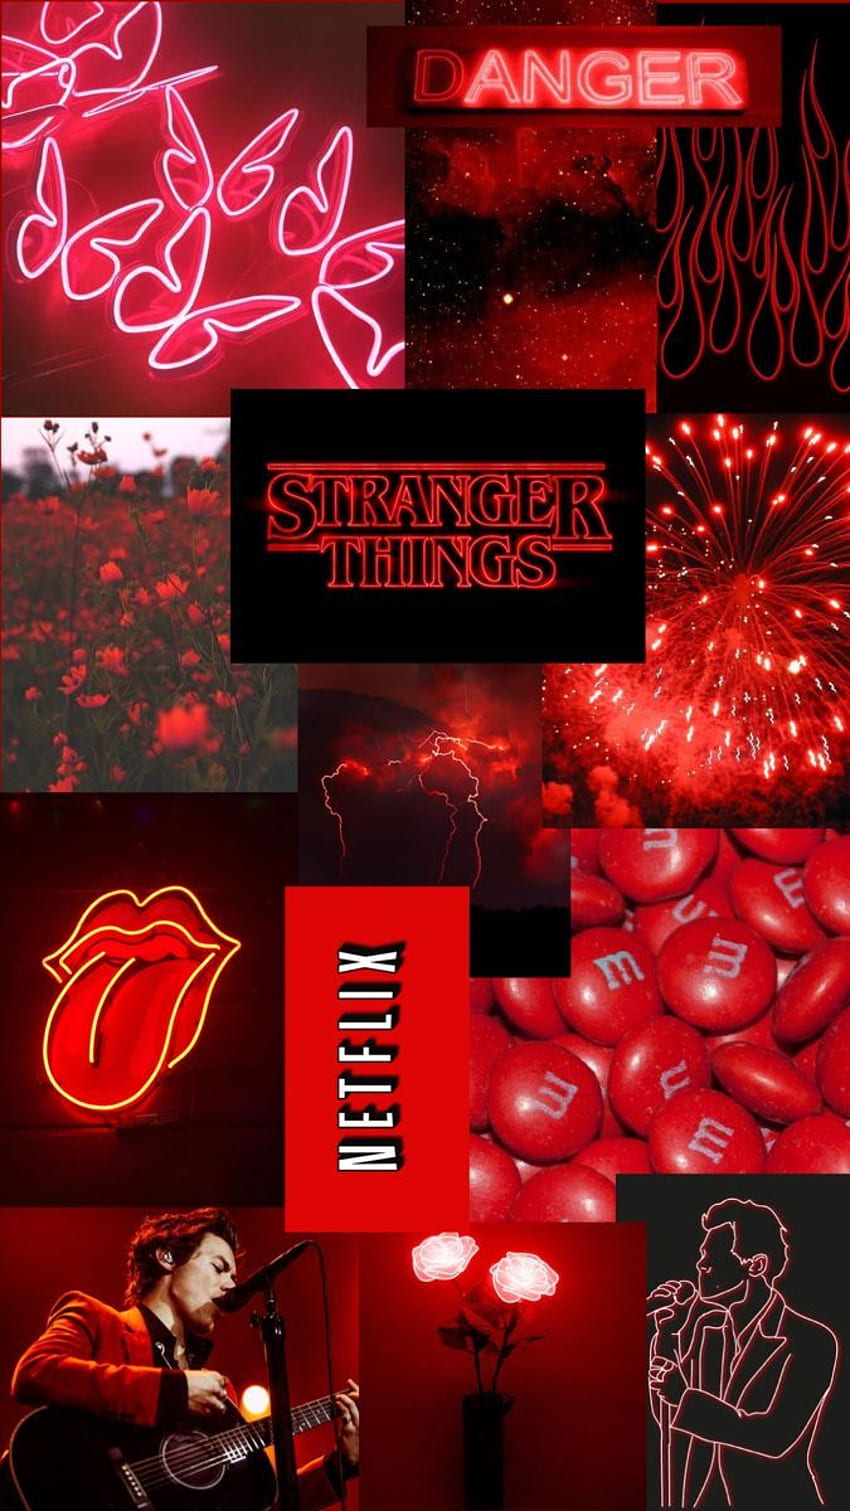 A collage of red and black images - Red, iPhone red, Netflix